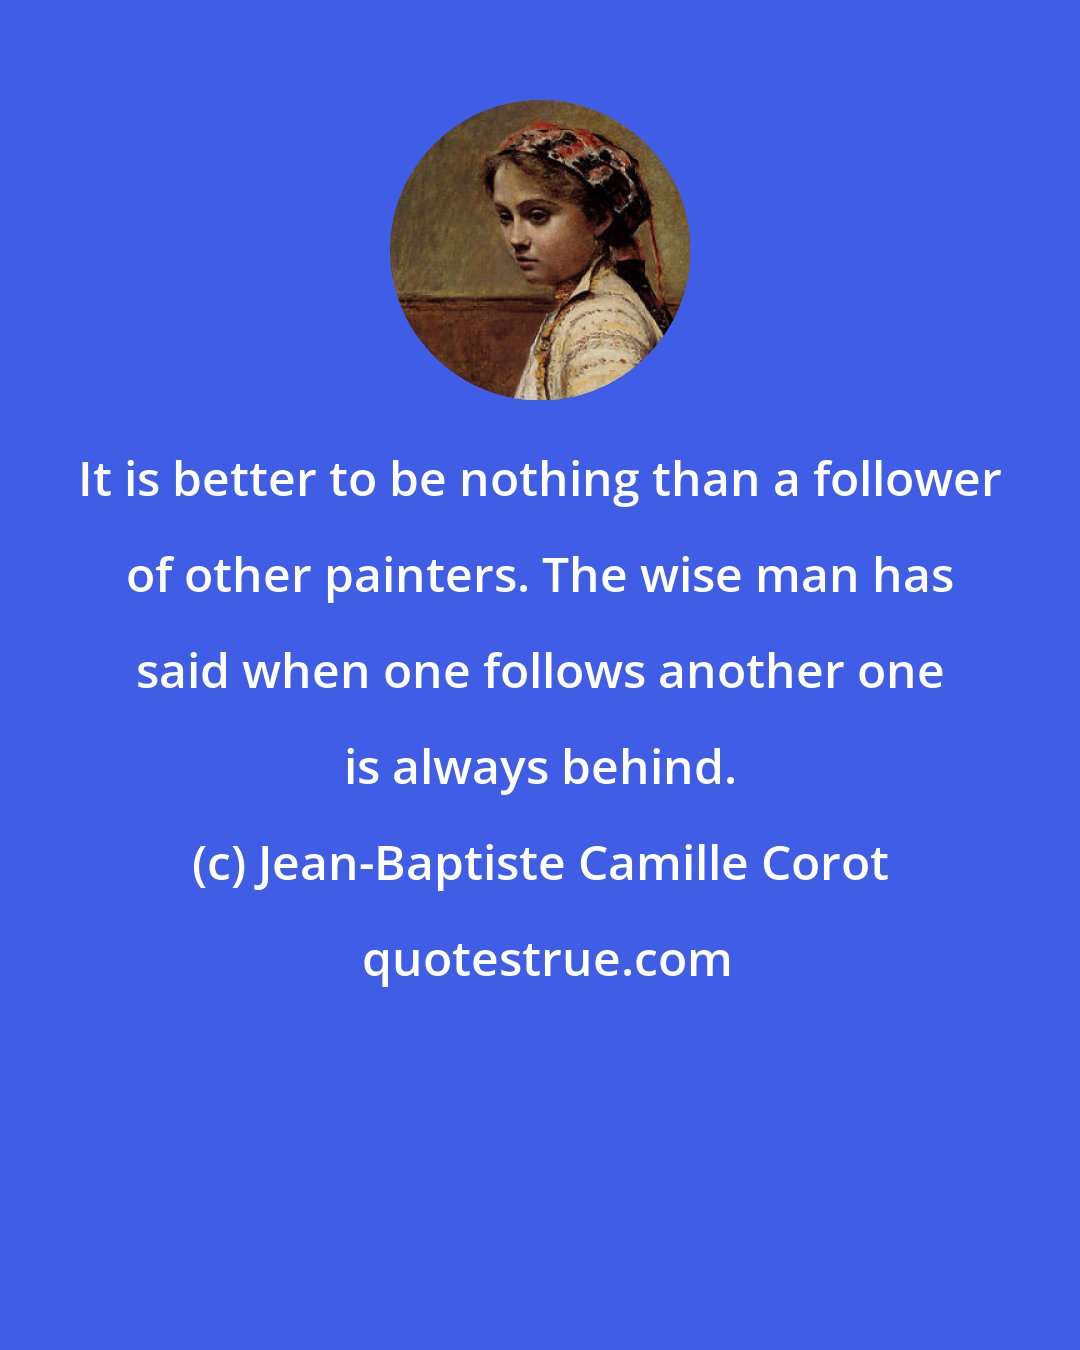 Jean-Baptiste Camille Corot: It is better to be nothing than a follower of other painters. The wise man has said when one follows another one is always behind.